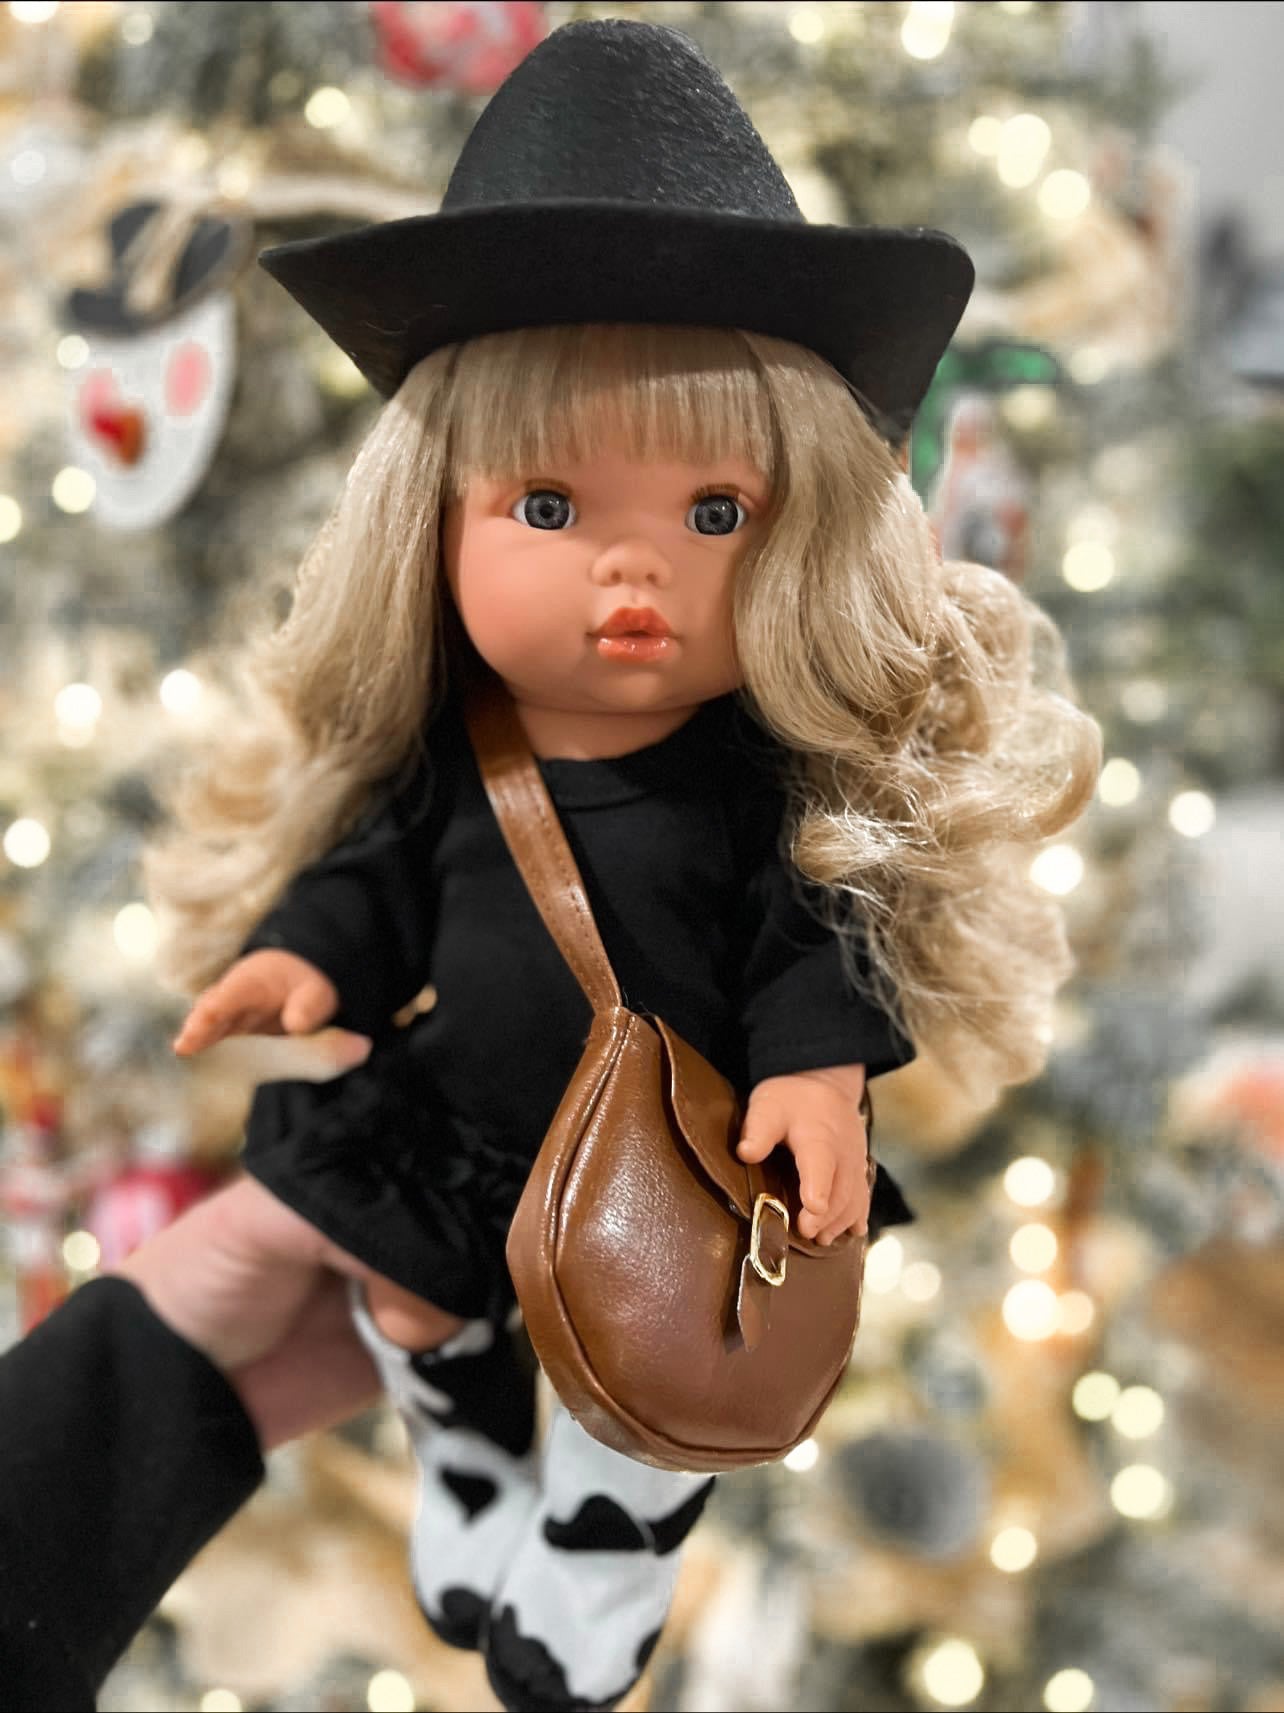 Leather Bag - Doll